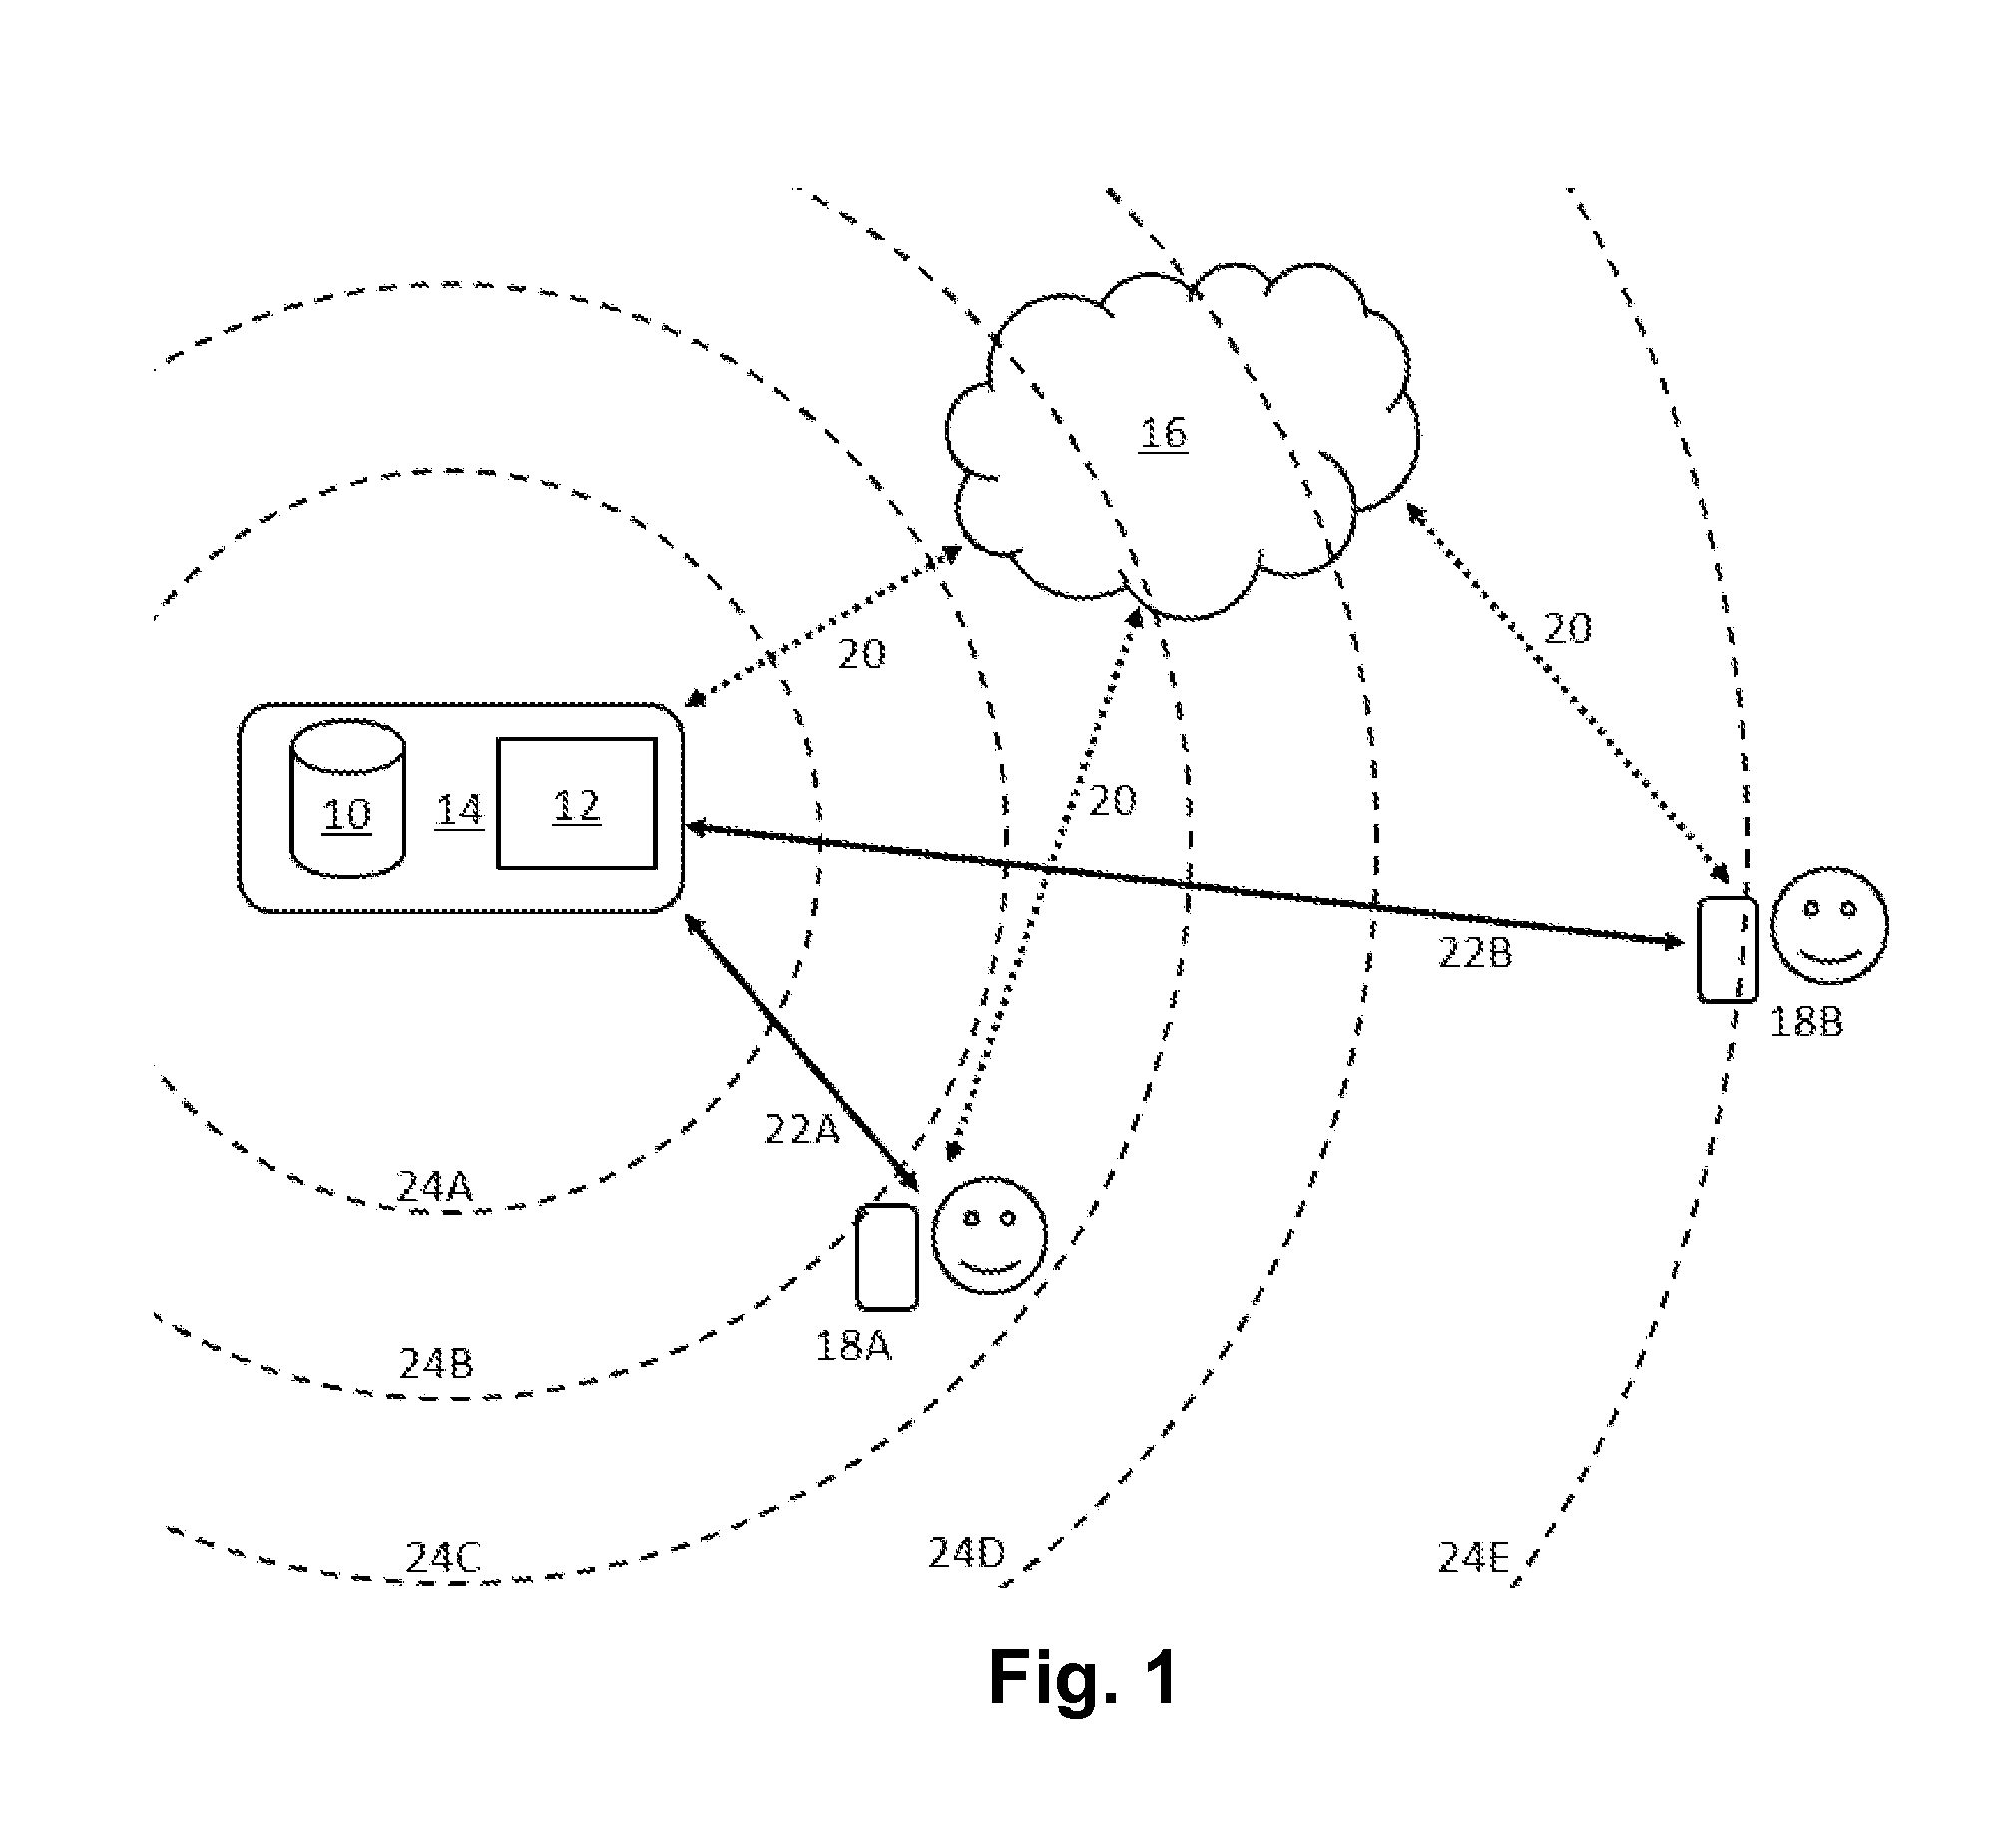 System and Method for Managing Appointments